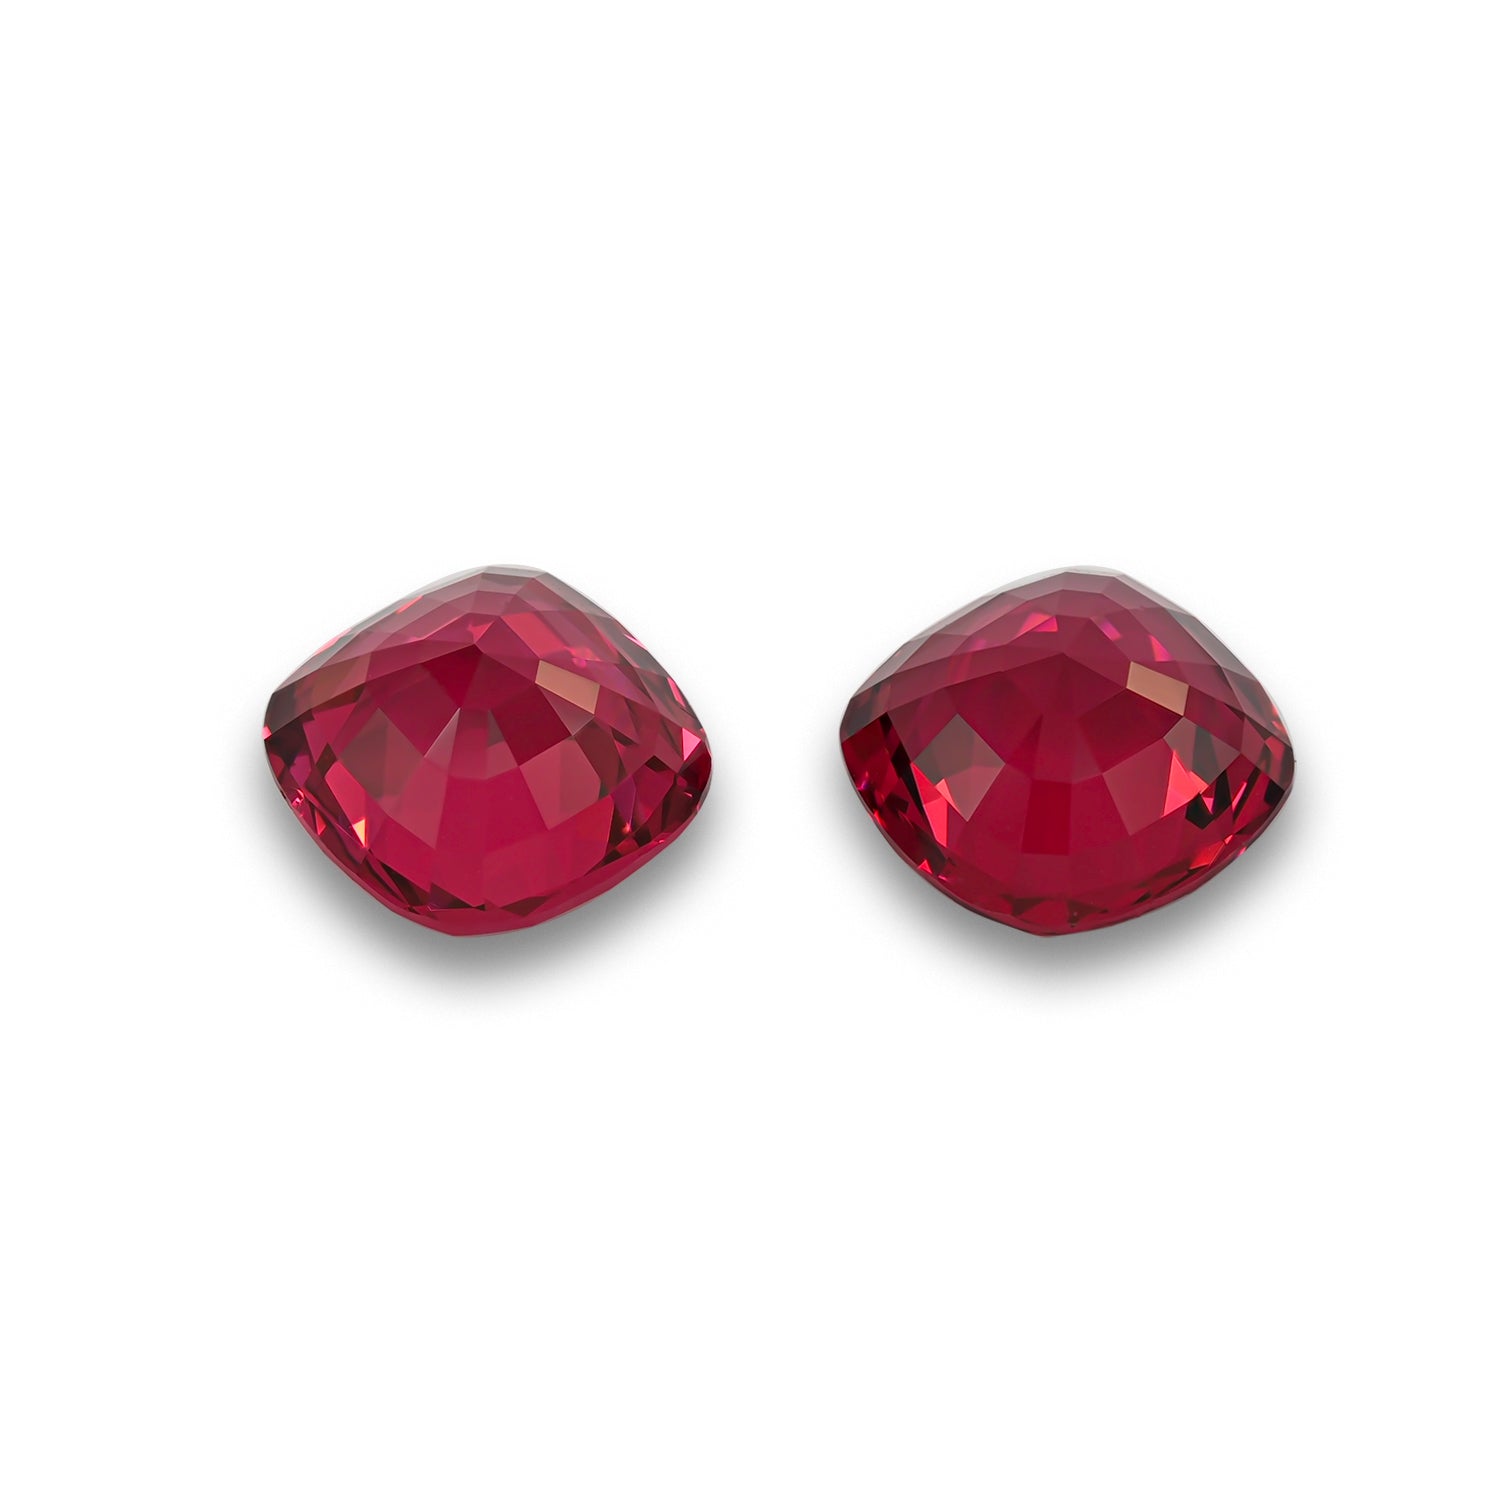 Cherry Red Spinel 4.44 CT/2